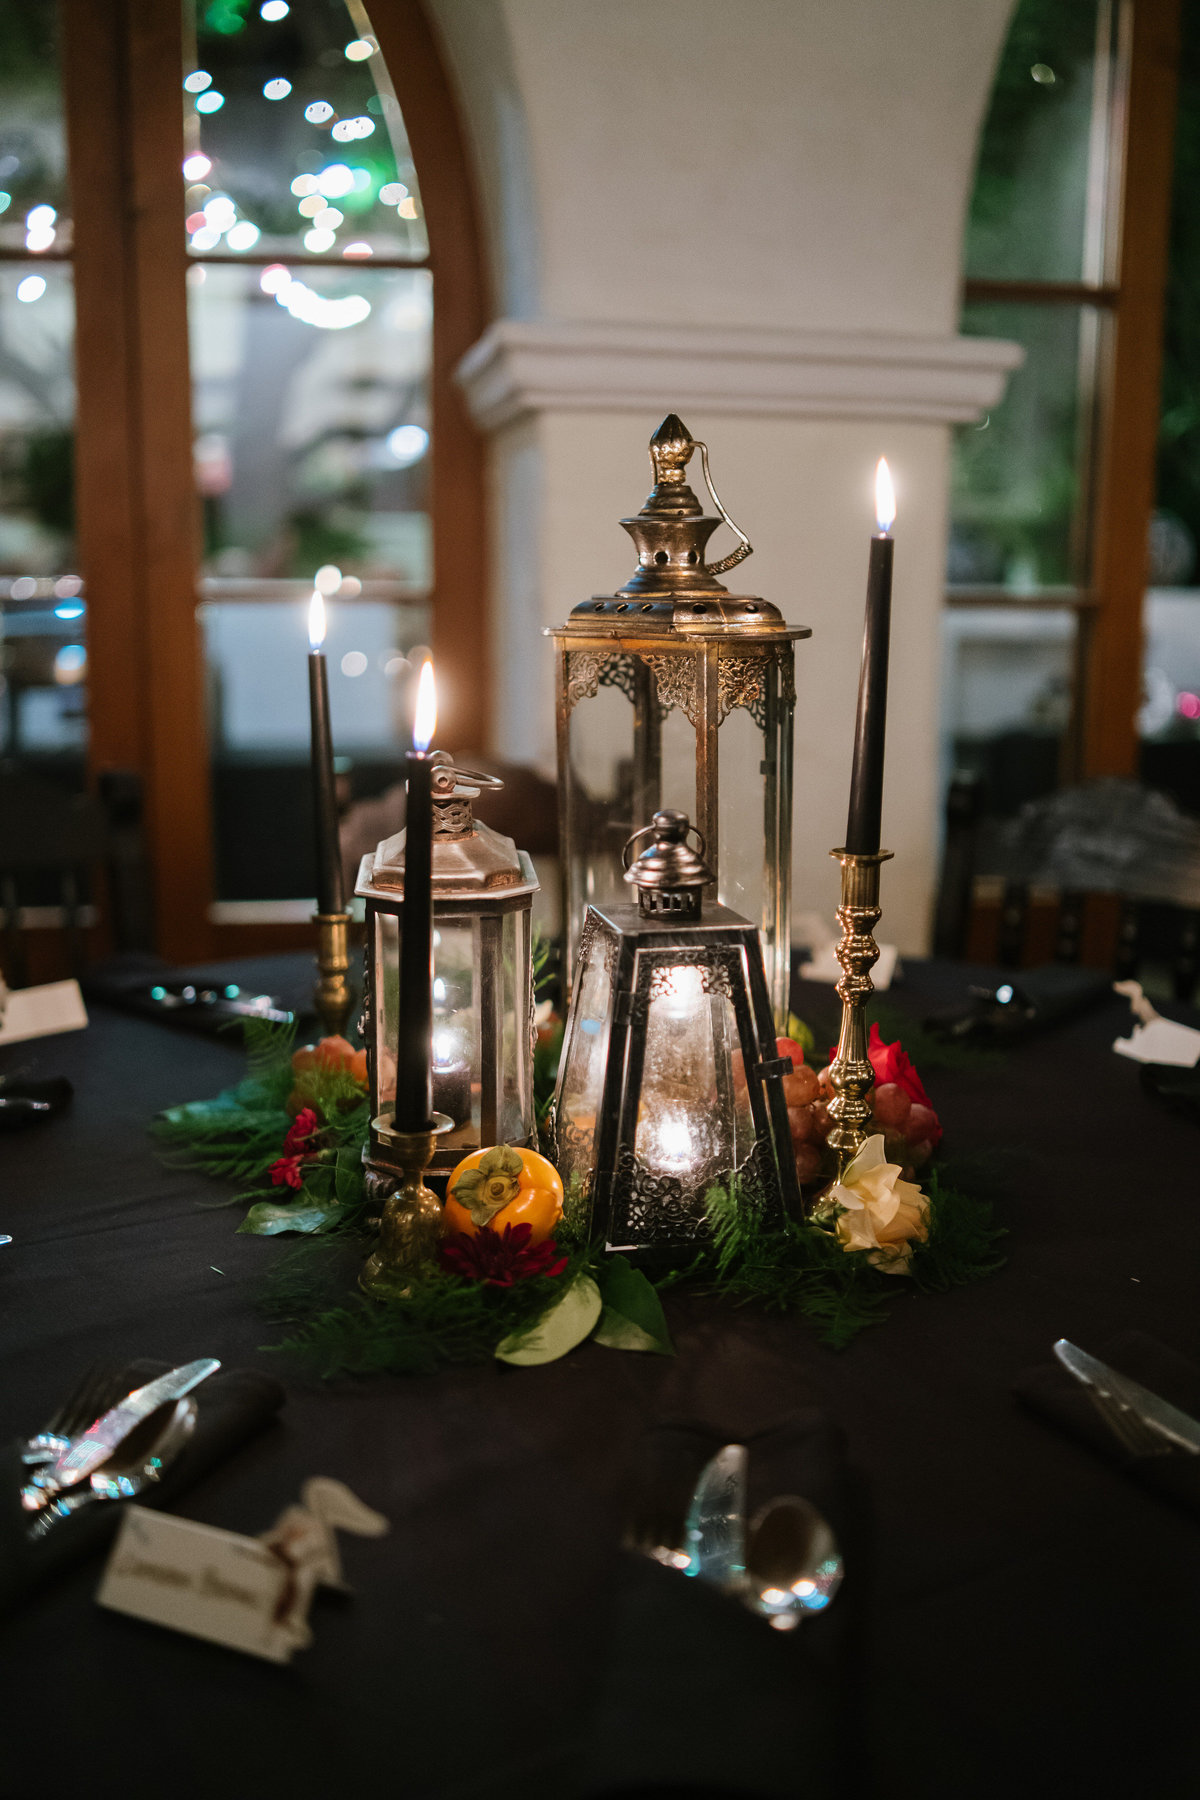 wedding reception table top details brass lanterns with candles and fruit for wedding decor at recption La Fonda on Main